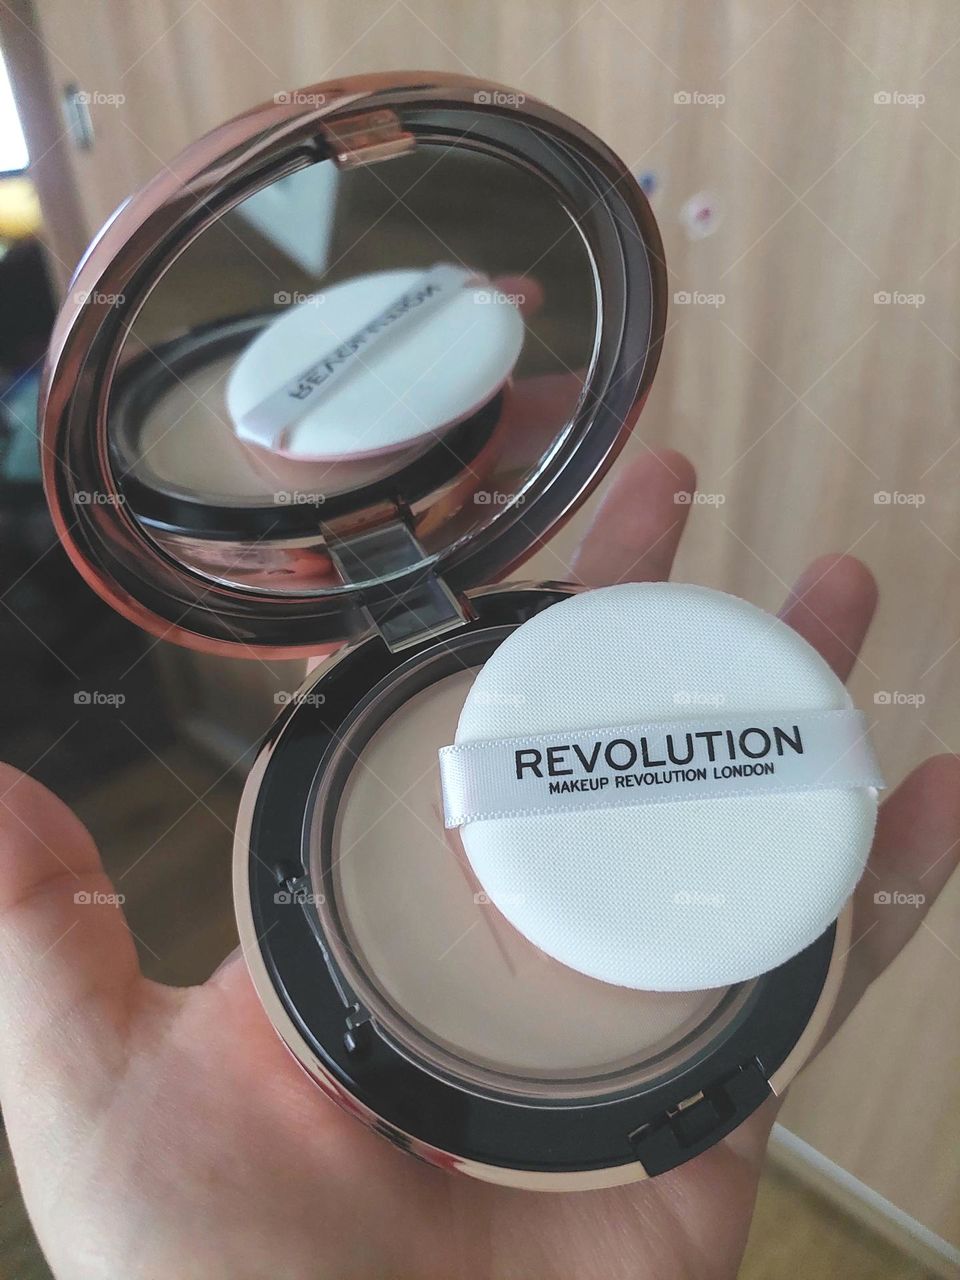 The makeup revolution of London